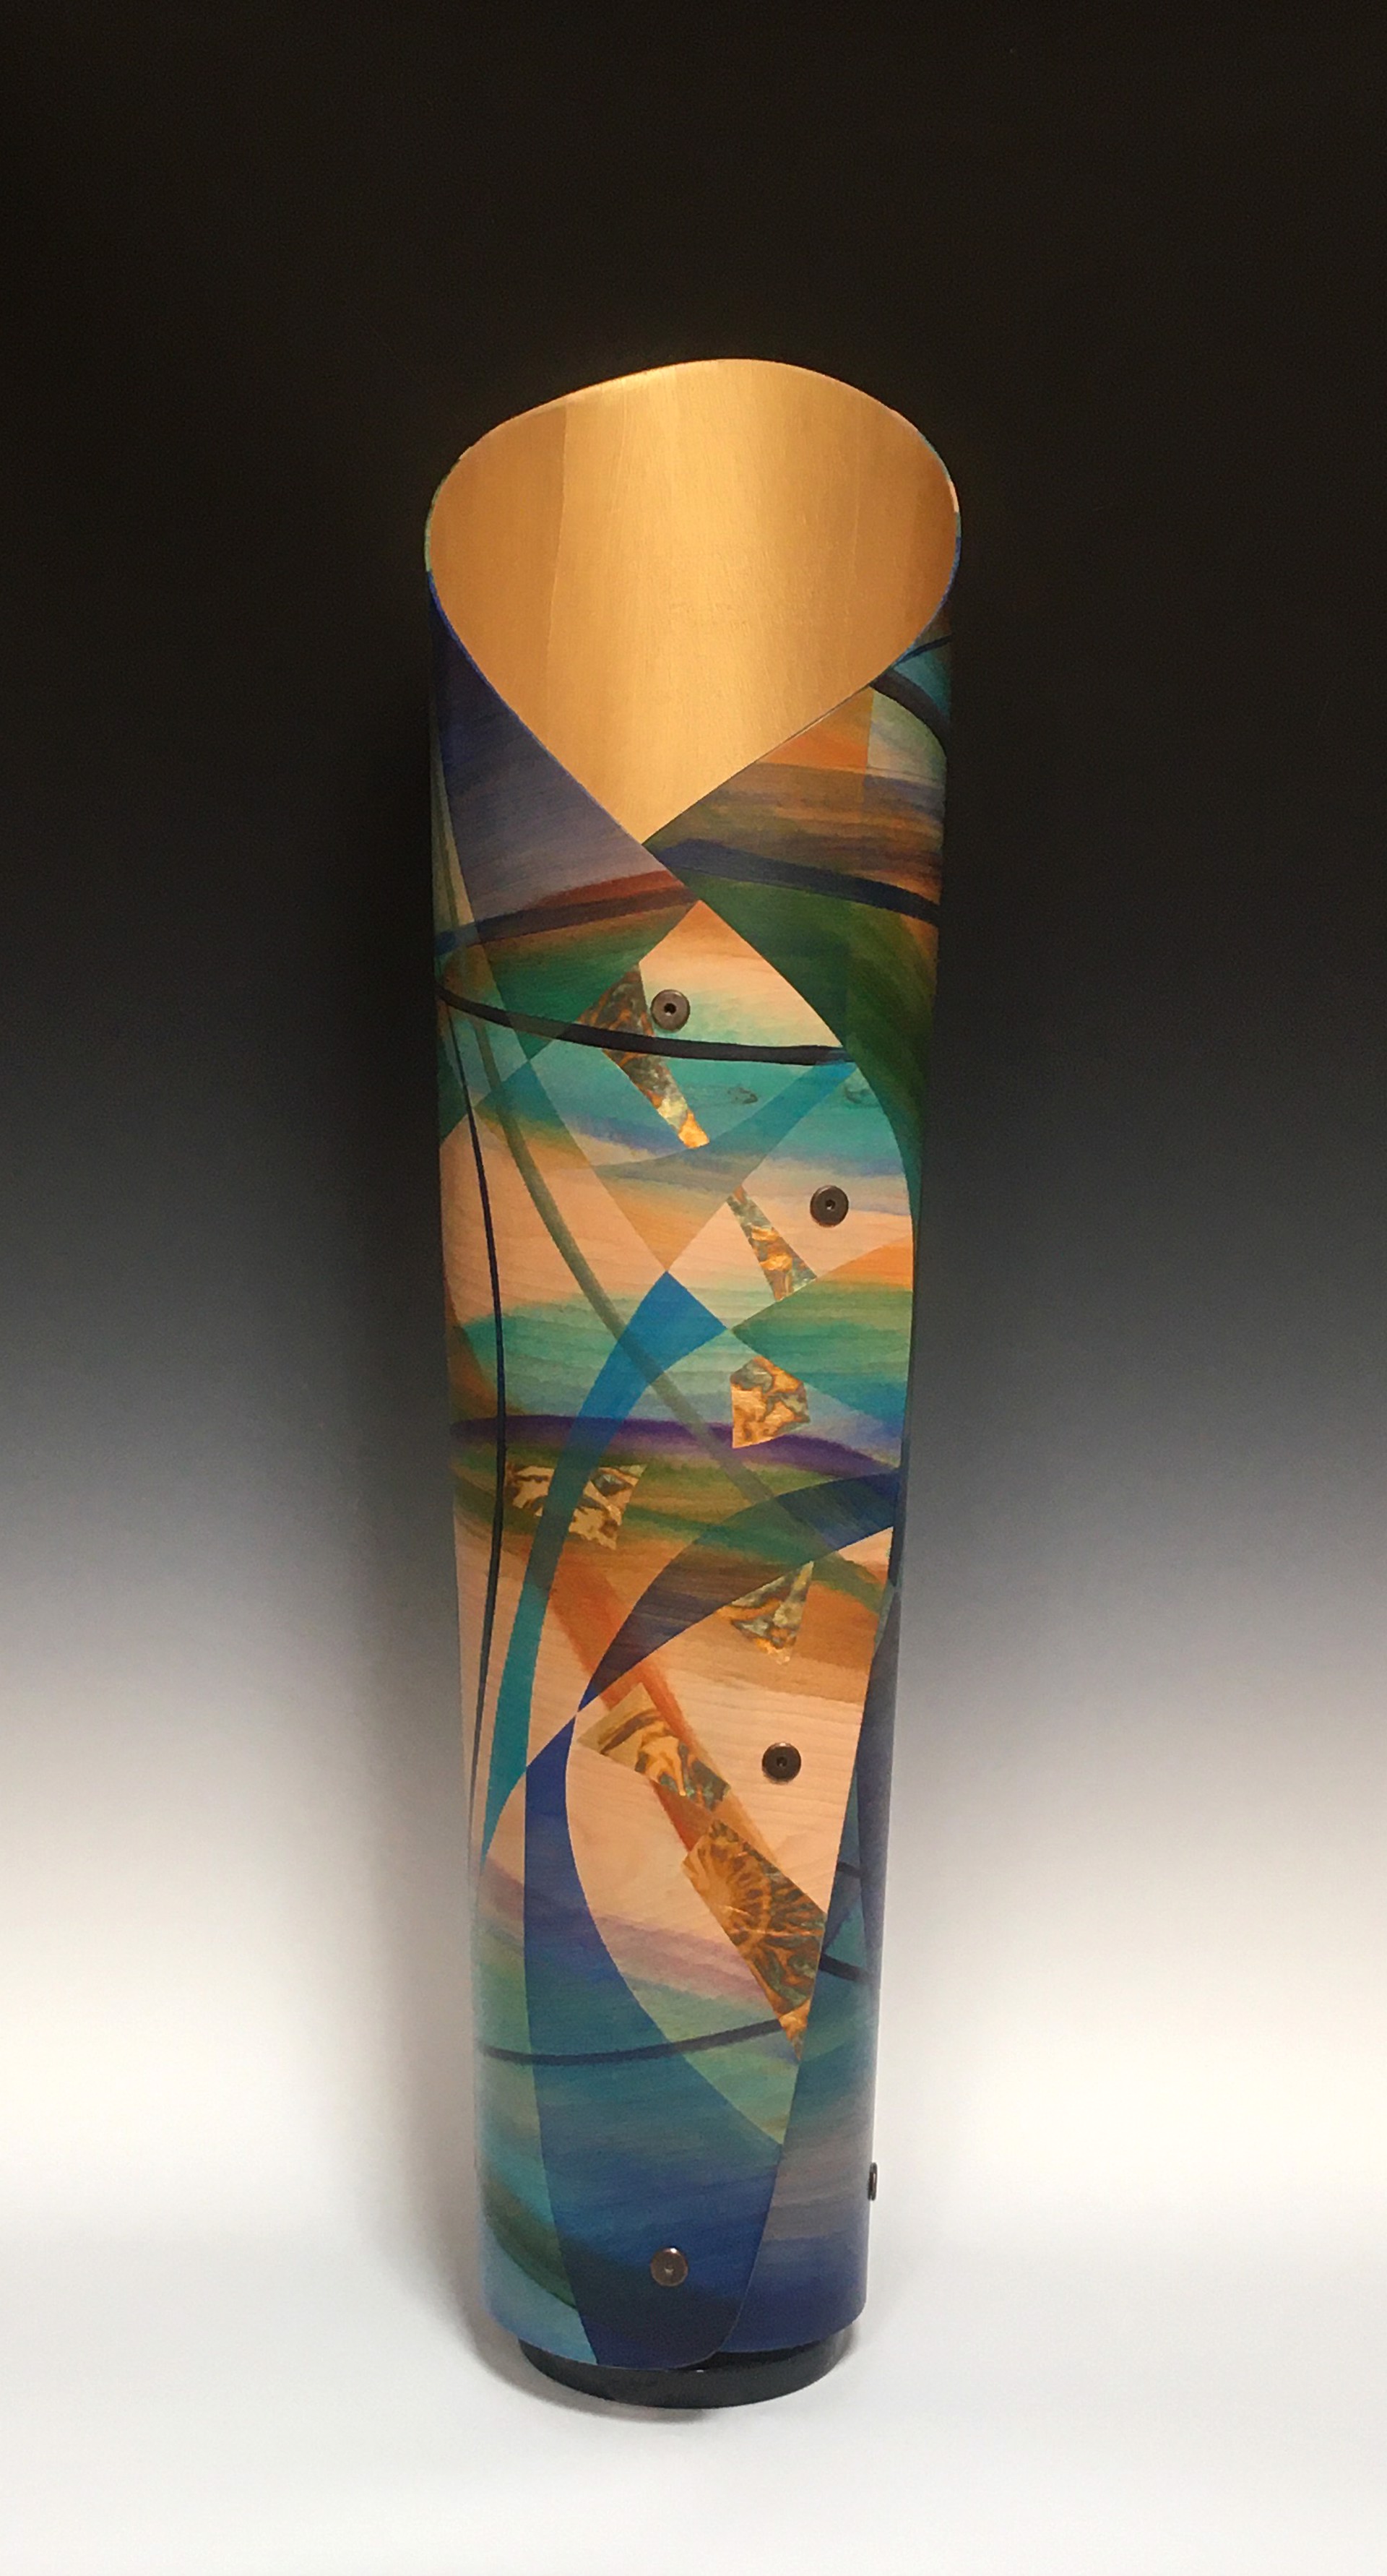 "Bentwood Lamp~Forest Shadow" by Cynthia Duff